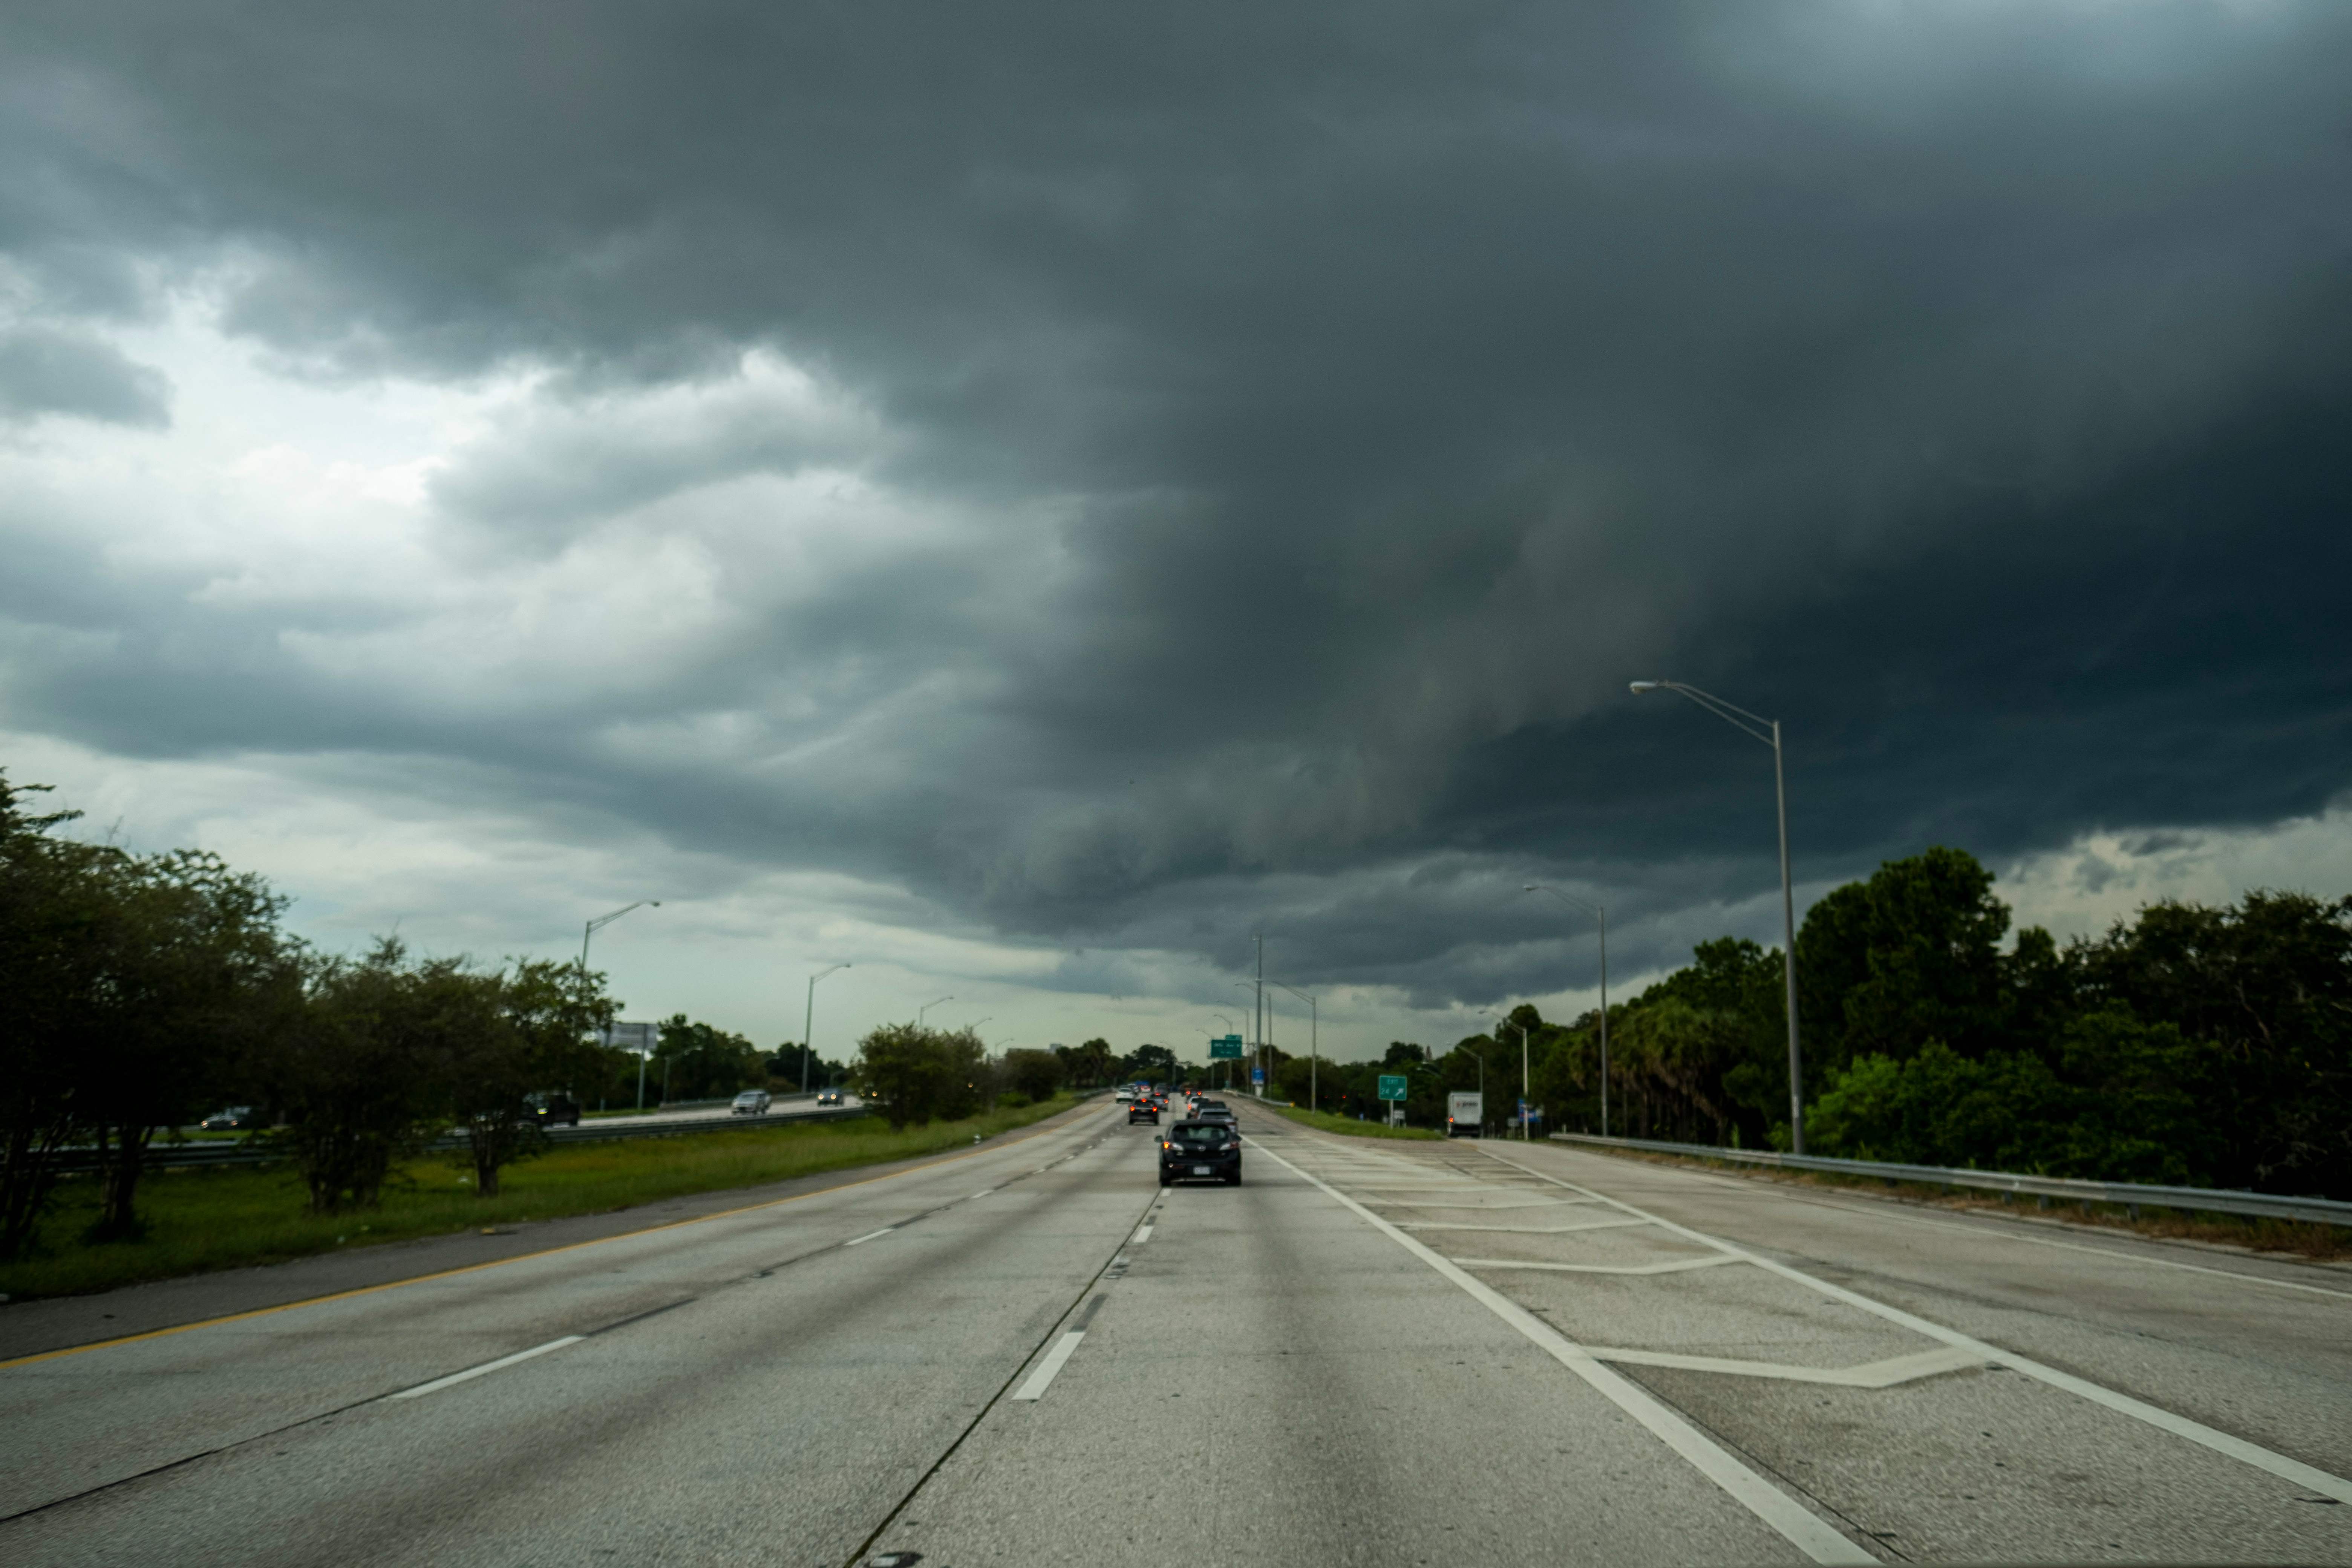 Florida is preparing for a historically violent storm